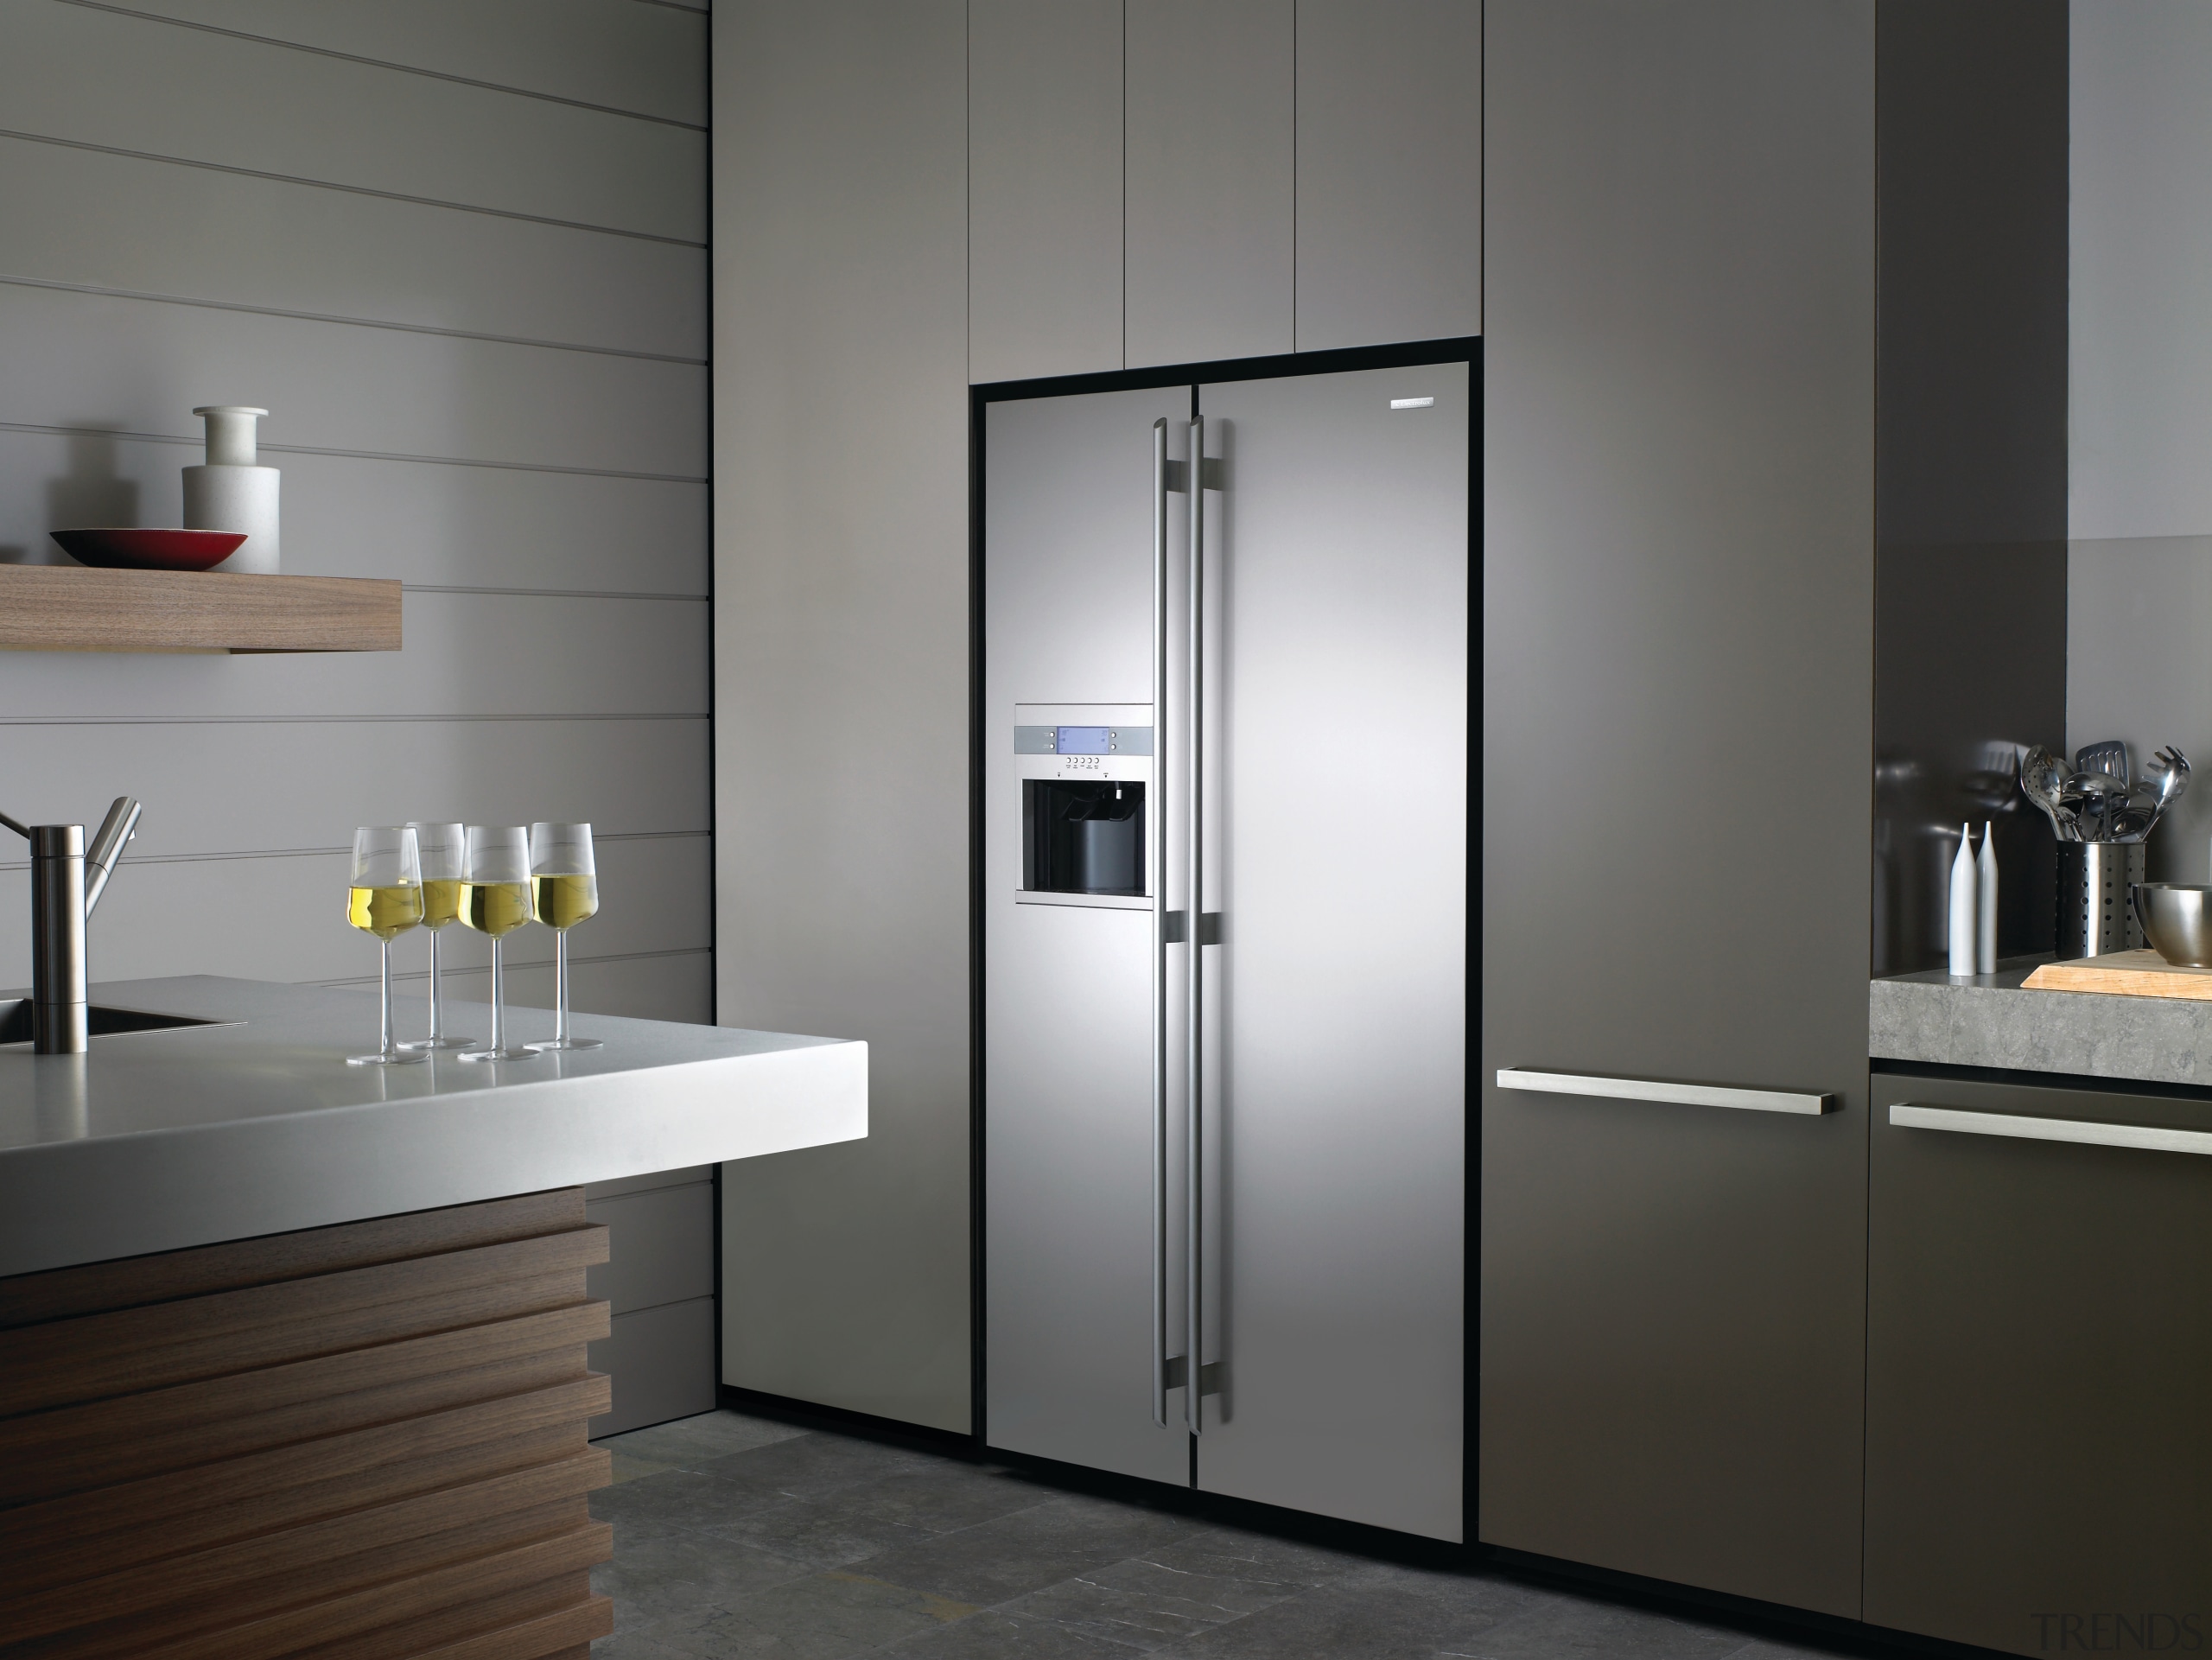 Electroluxs E:lie side-by-side refrigerator combines a large capacity home appliance, kitchen, kitchen appliance, major appliance, product design, refrigerator, gray, black